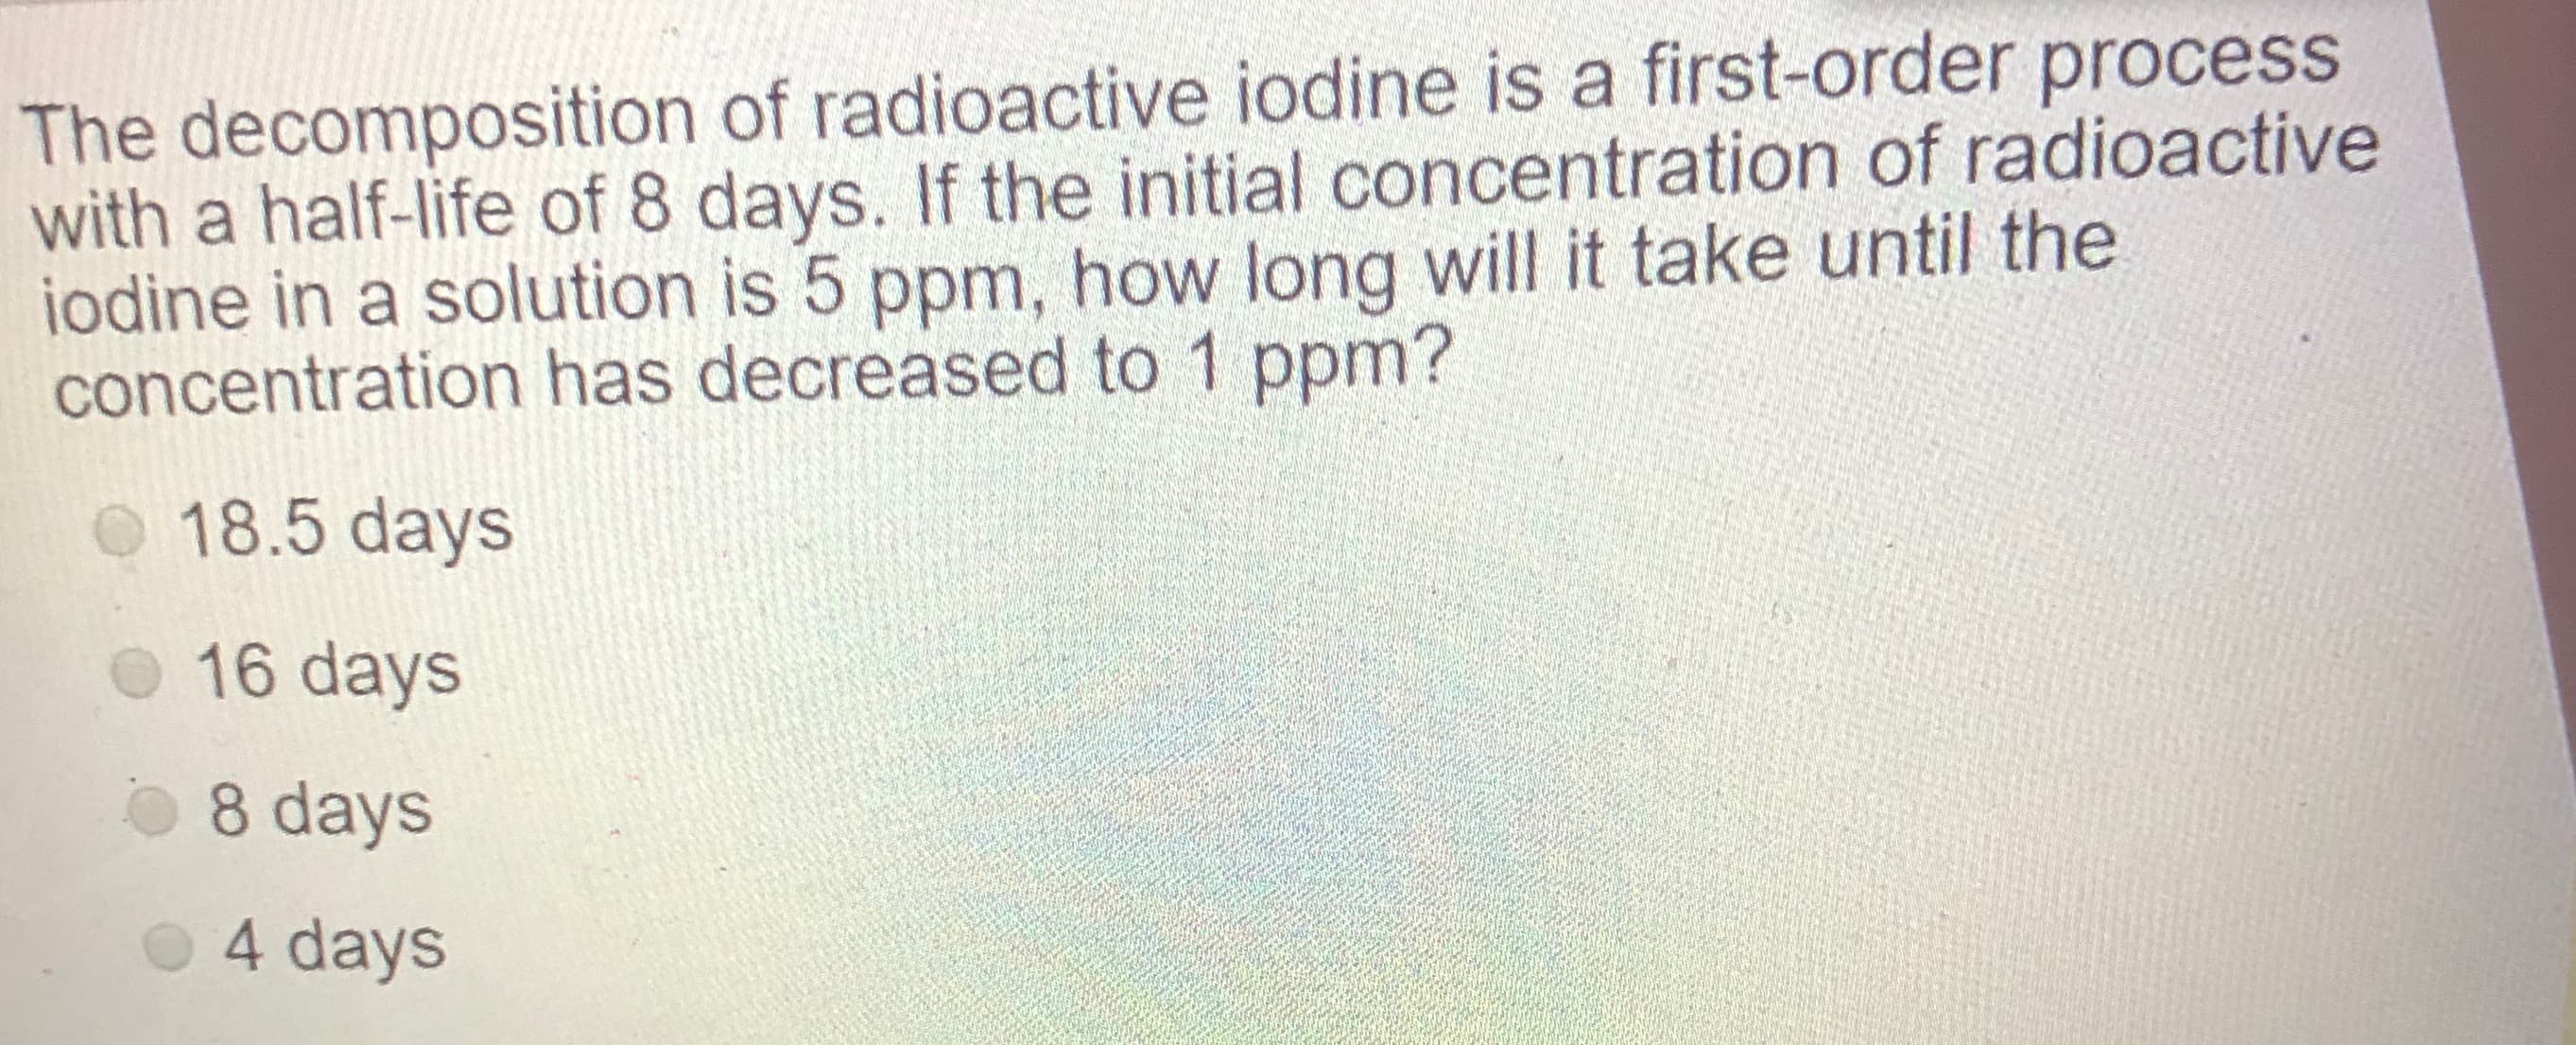 The decomposition of radioactive iodine is a first-order process
with a half-life of 8 days. If the initial concentration of radioactive
iodine in a solution is 5 ppm, how long will it take until the
concentration has decreased to 1 ppm?
